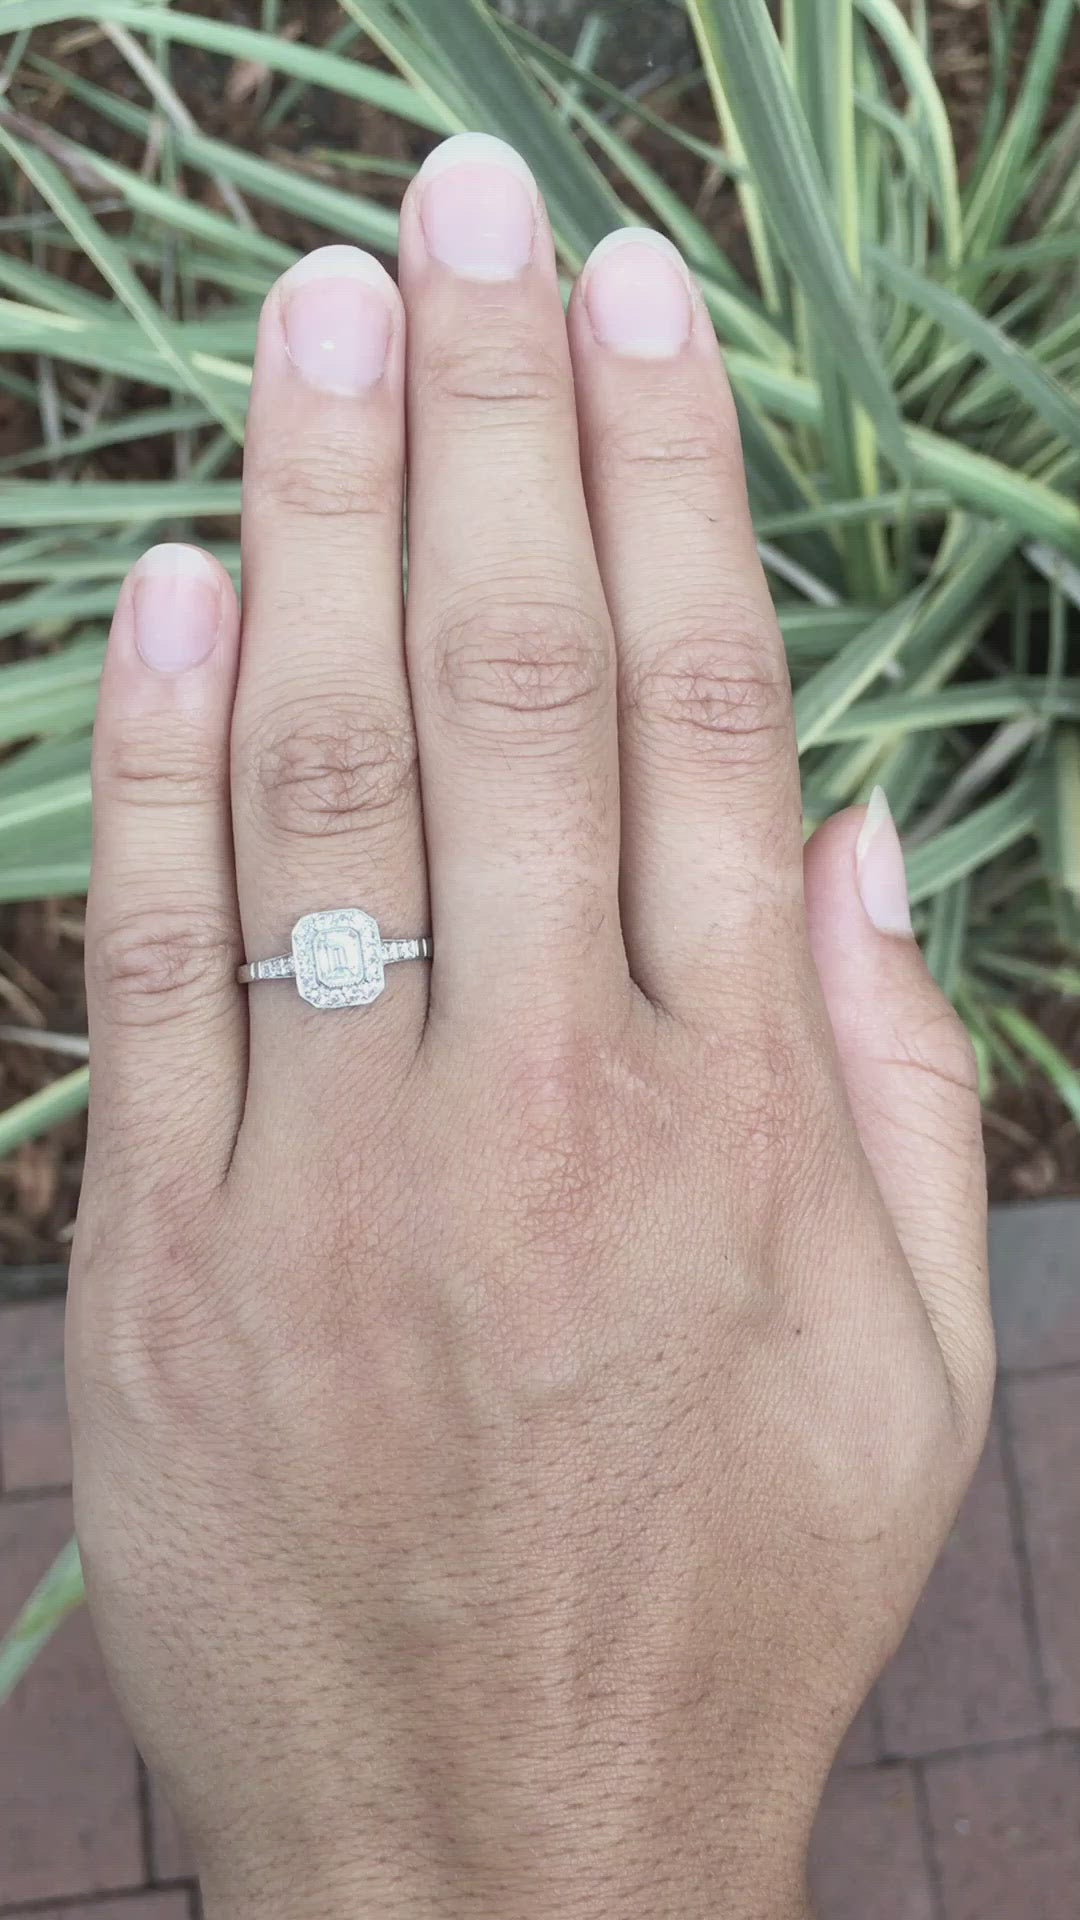 A view of this ring outside shows good sparkle in the diamond.